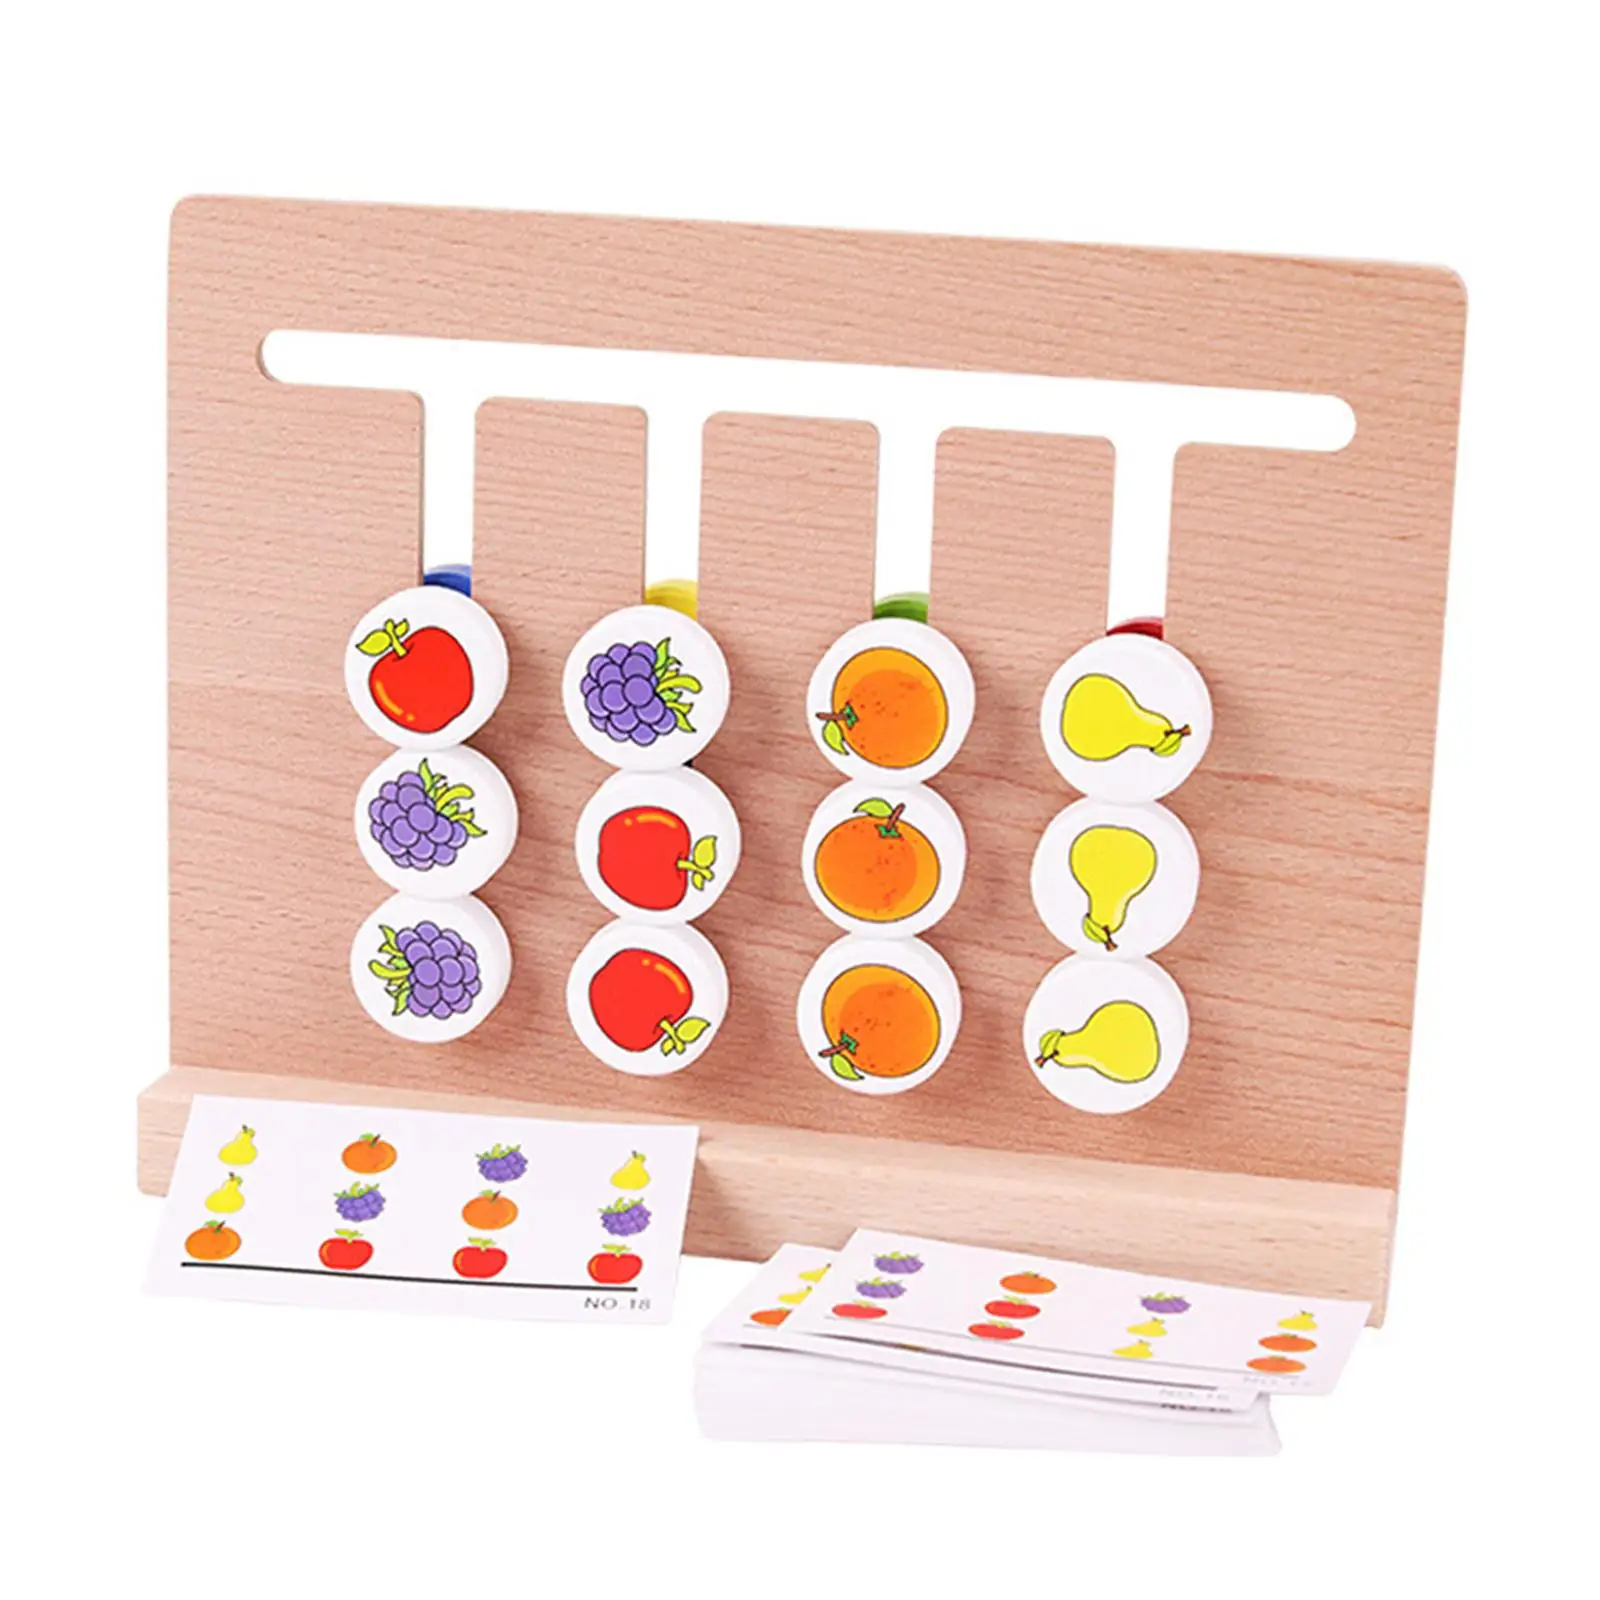 Wooden Matching Game Cognition Birthday Gifts Developmental Toy Educational Color Sort Board for Preschool Nursery Toddlers